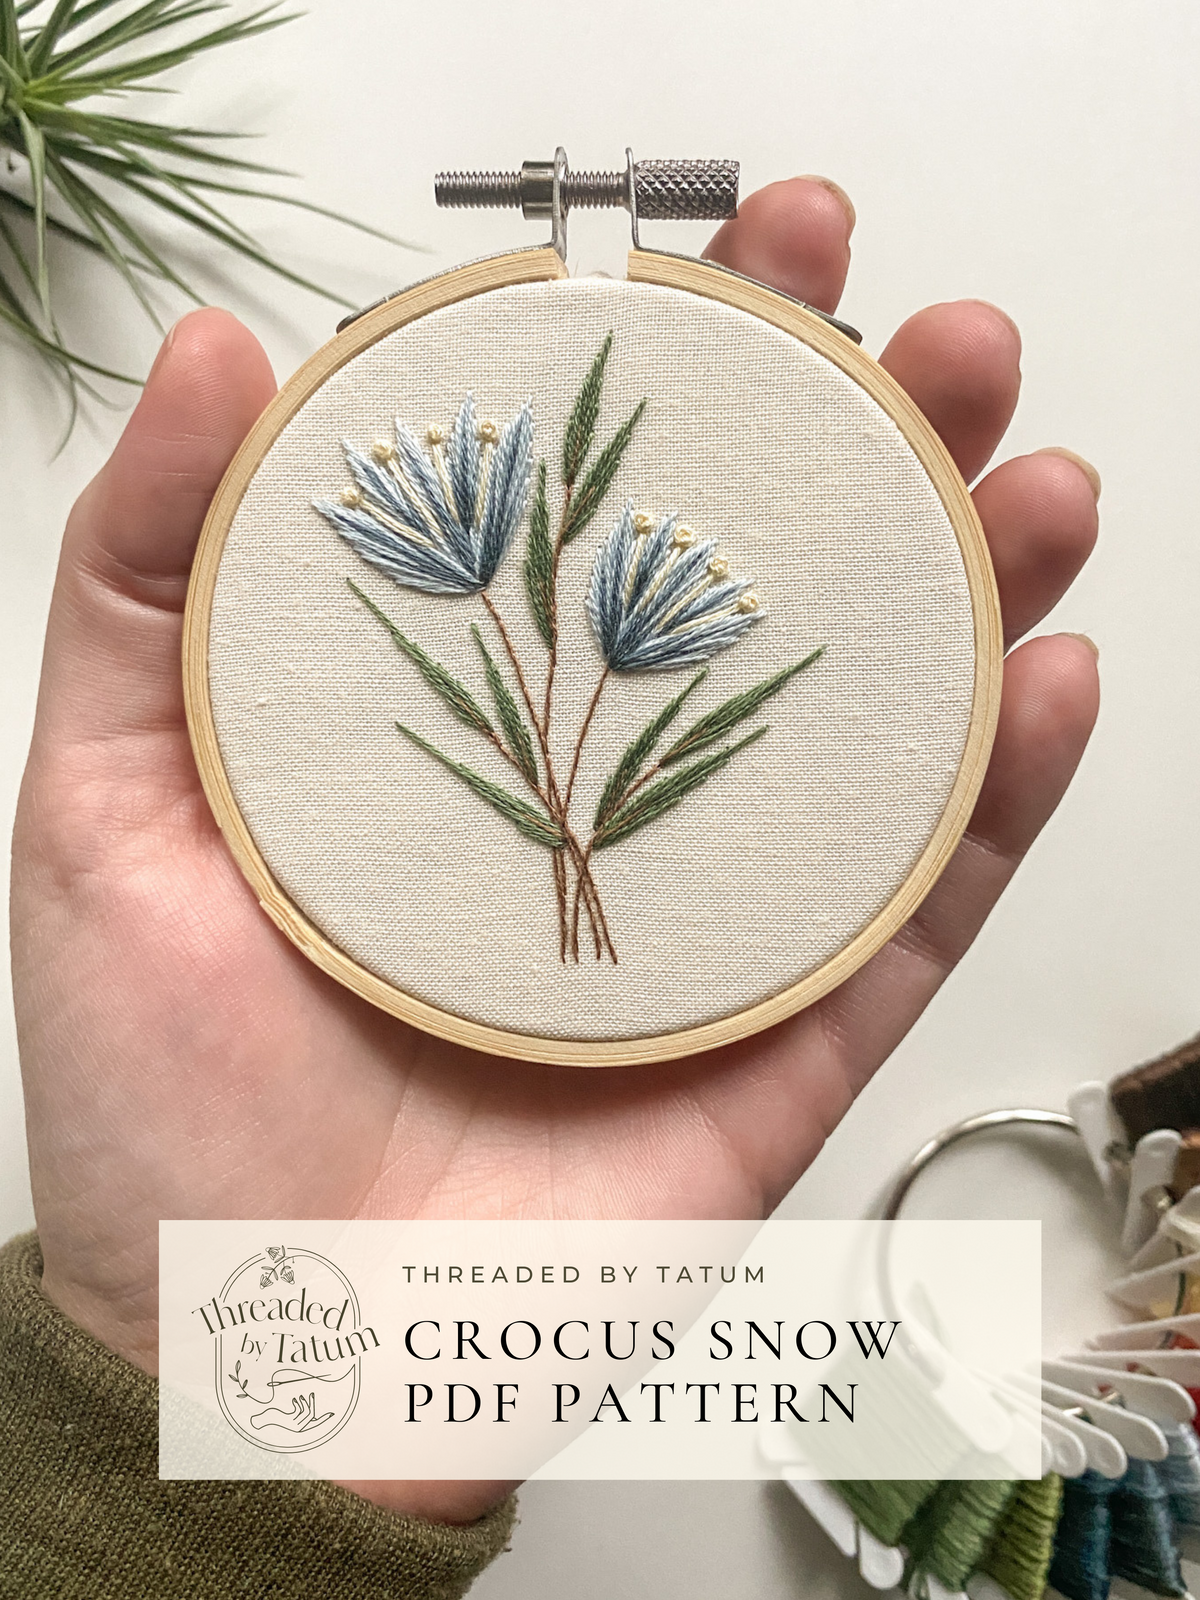 Embroidery Kit, Beginner Christmas Embroidery Pattern, Winter Embroidery  Kit, Easy Embroidery Kit, Botanical Embroidery Kit, DIY Craft Kit 